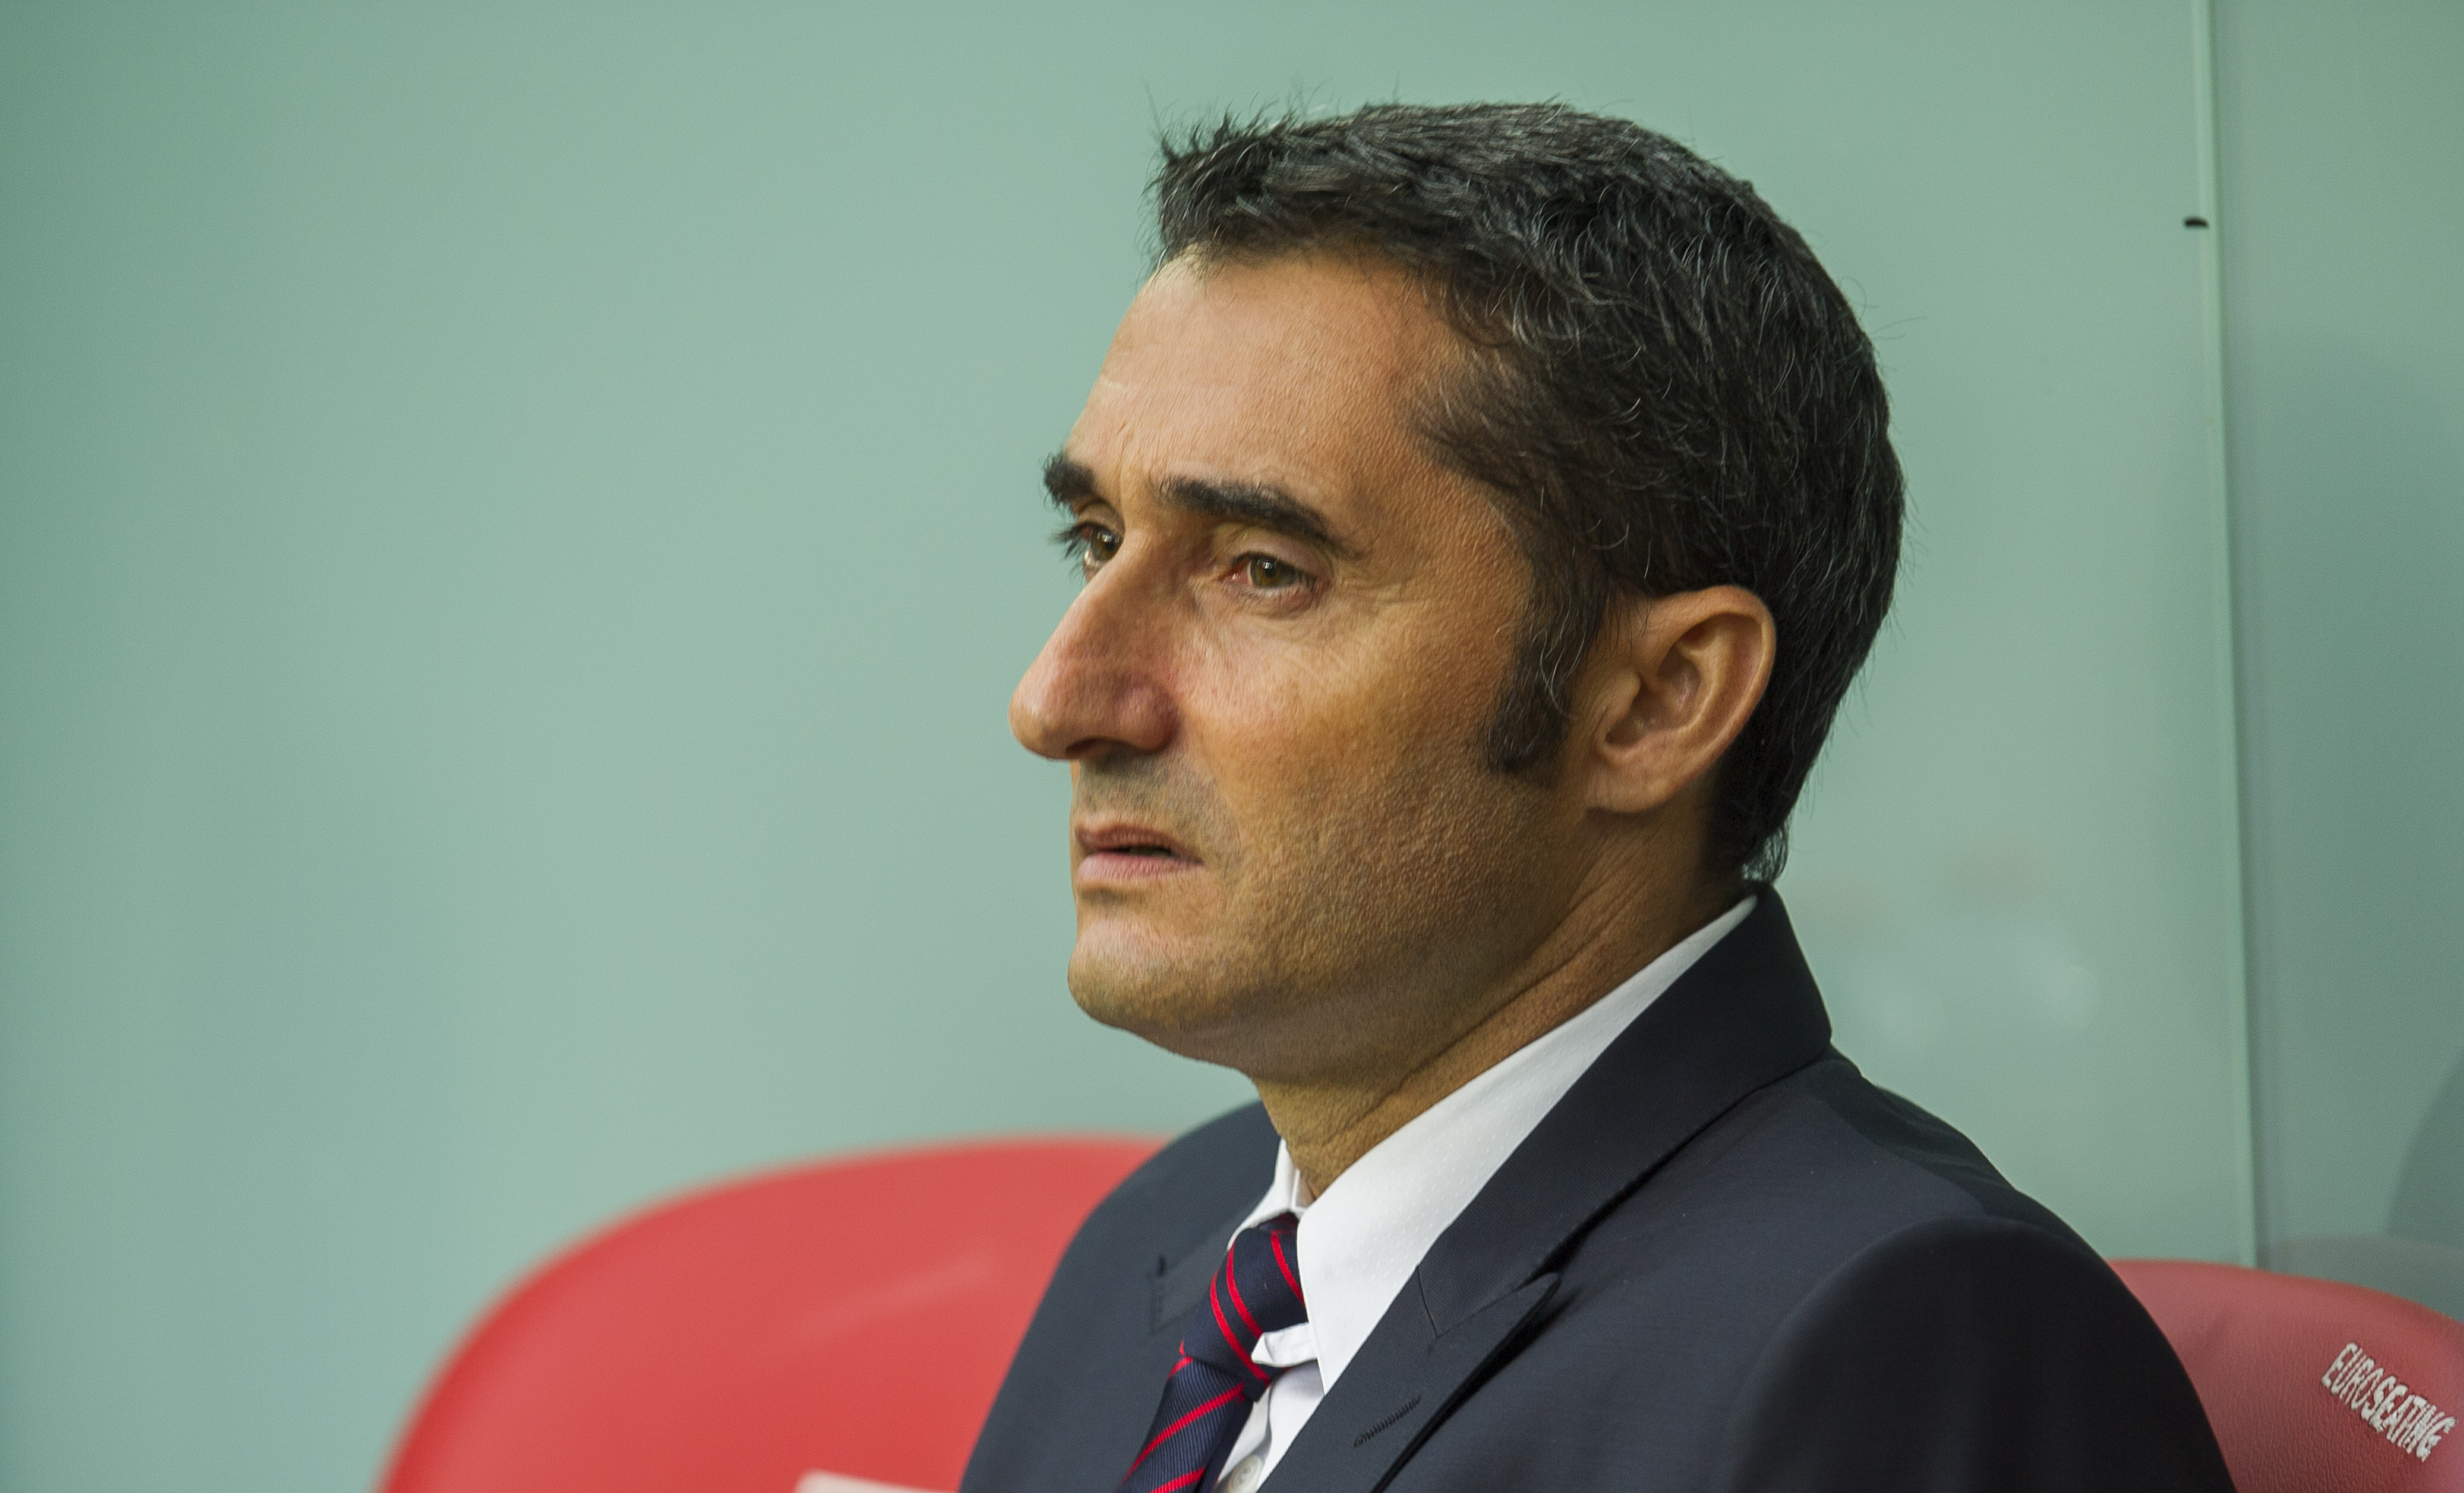 BILBAO, SPAIN - AUGUST 30:  Head coach Ernesto Valverde of Athletic Club Bilbao looks on prior to the start the la Liga match between Athletic Club and Levante UD at San Mames Stadium on August 30, 2014 in Bilbao, Spain.  (Photo by Juan Manuel Serrano Arce/Getty Images)